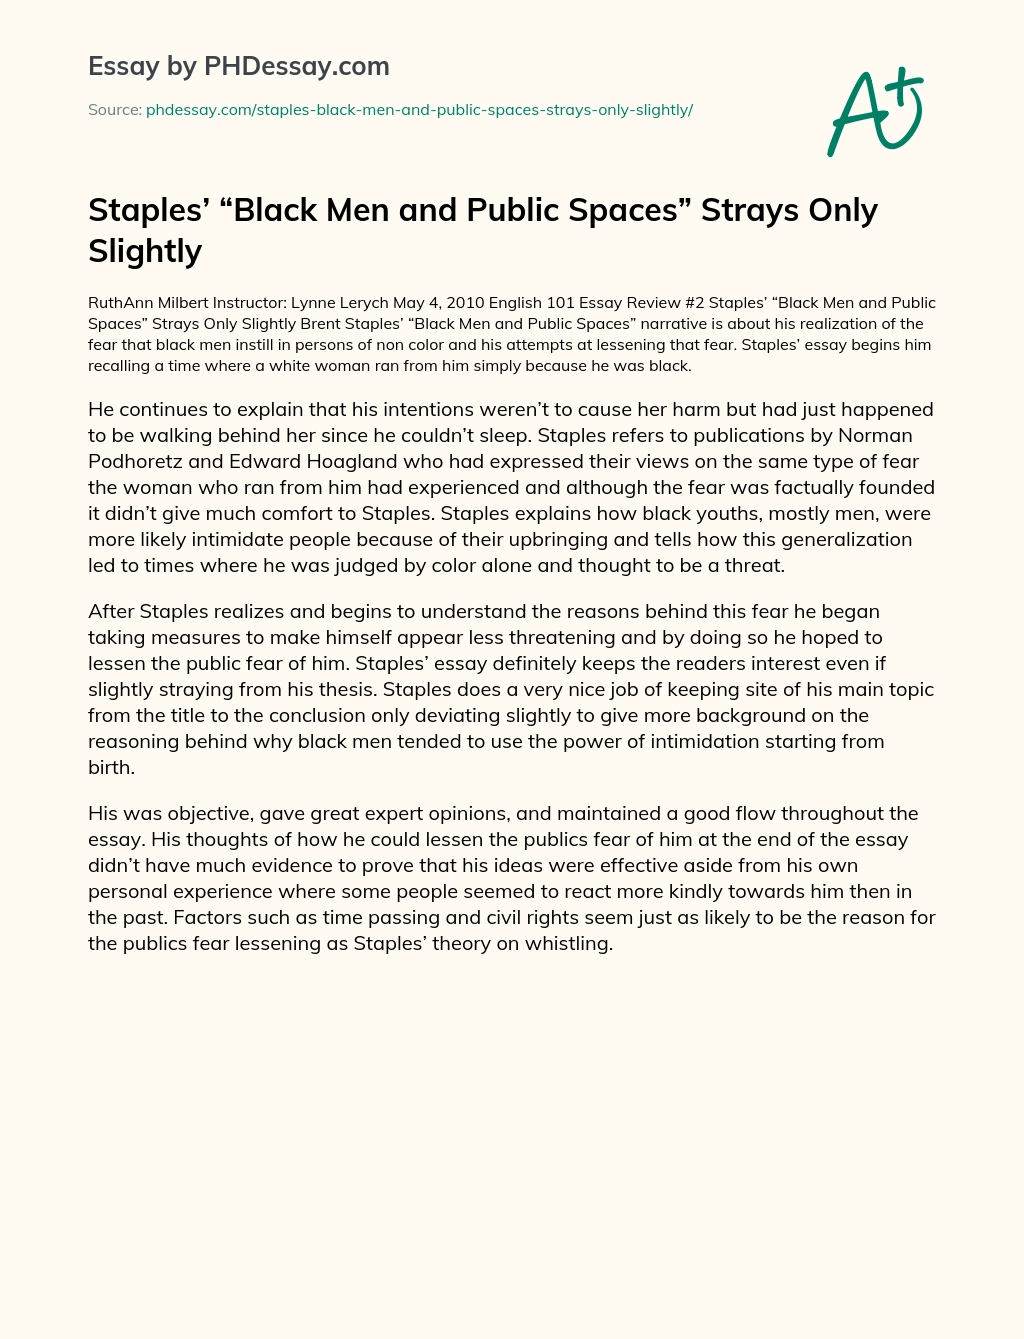 Staples’ “Black Men and Public Spaces” Strays Only Slightly essay